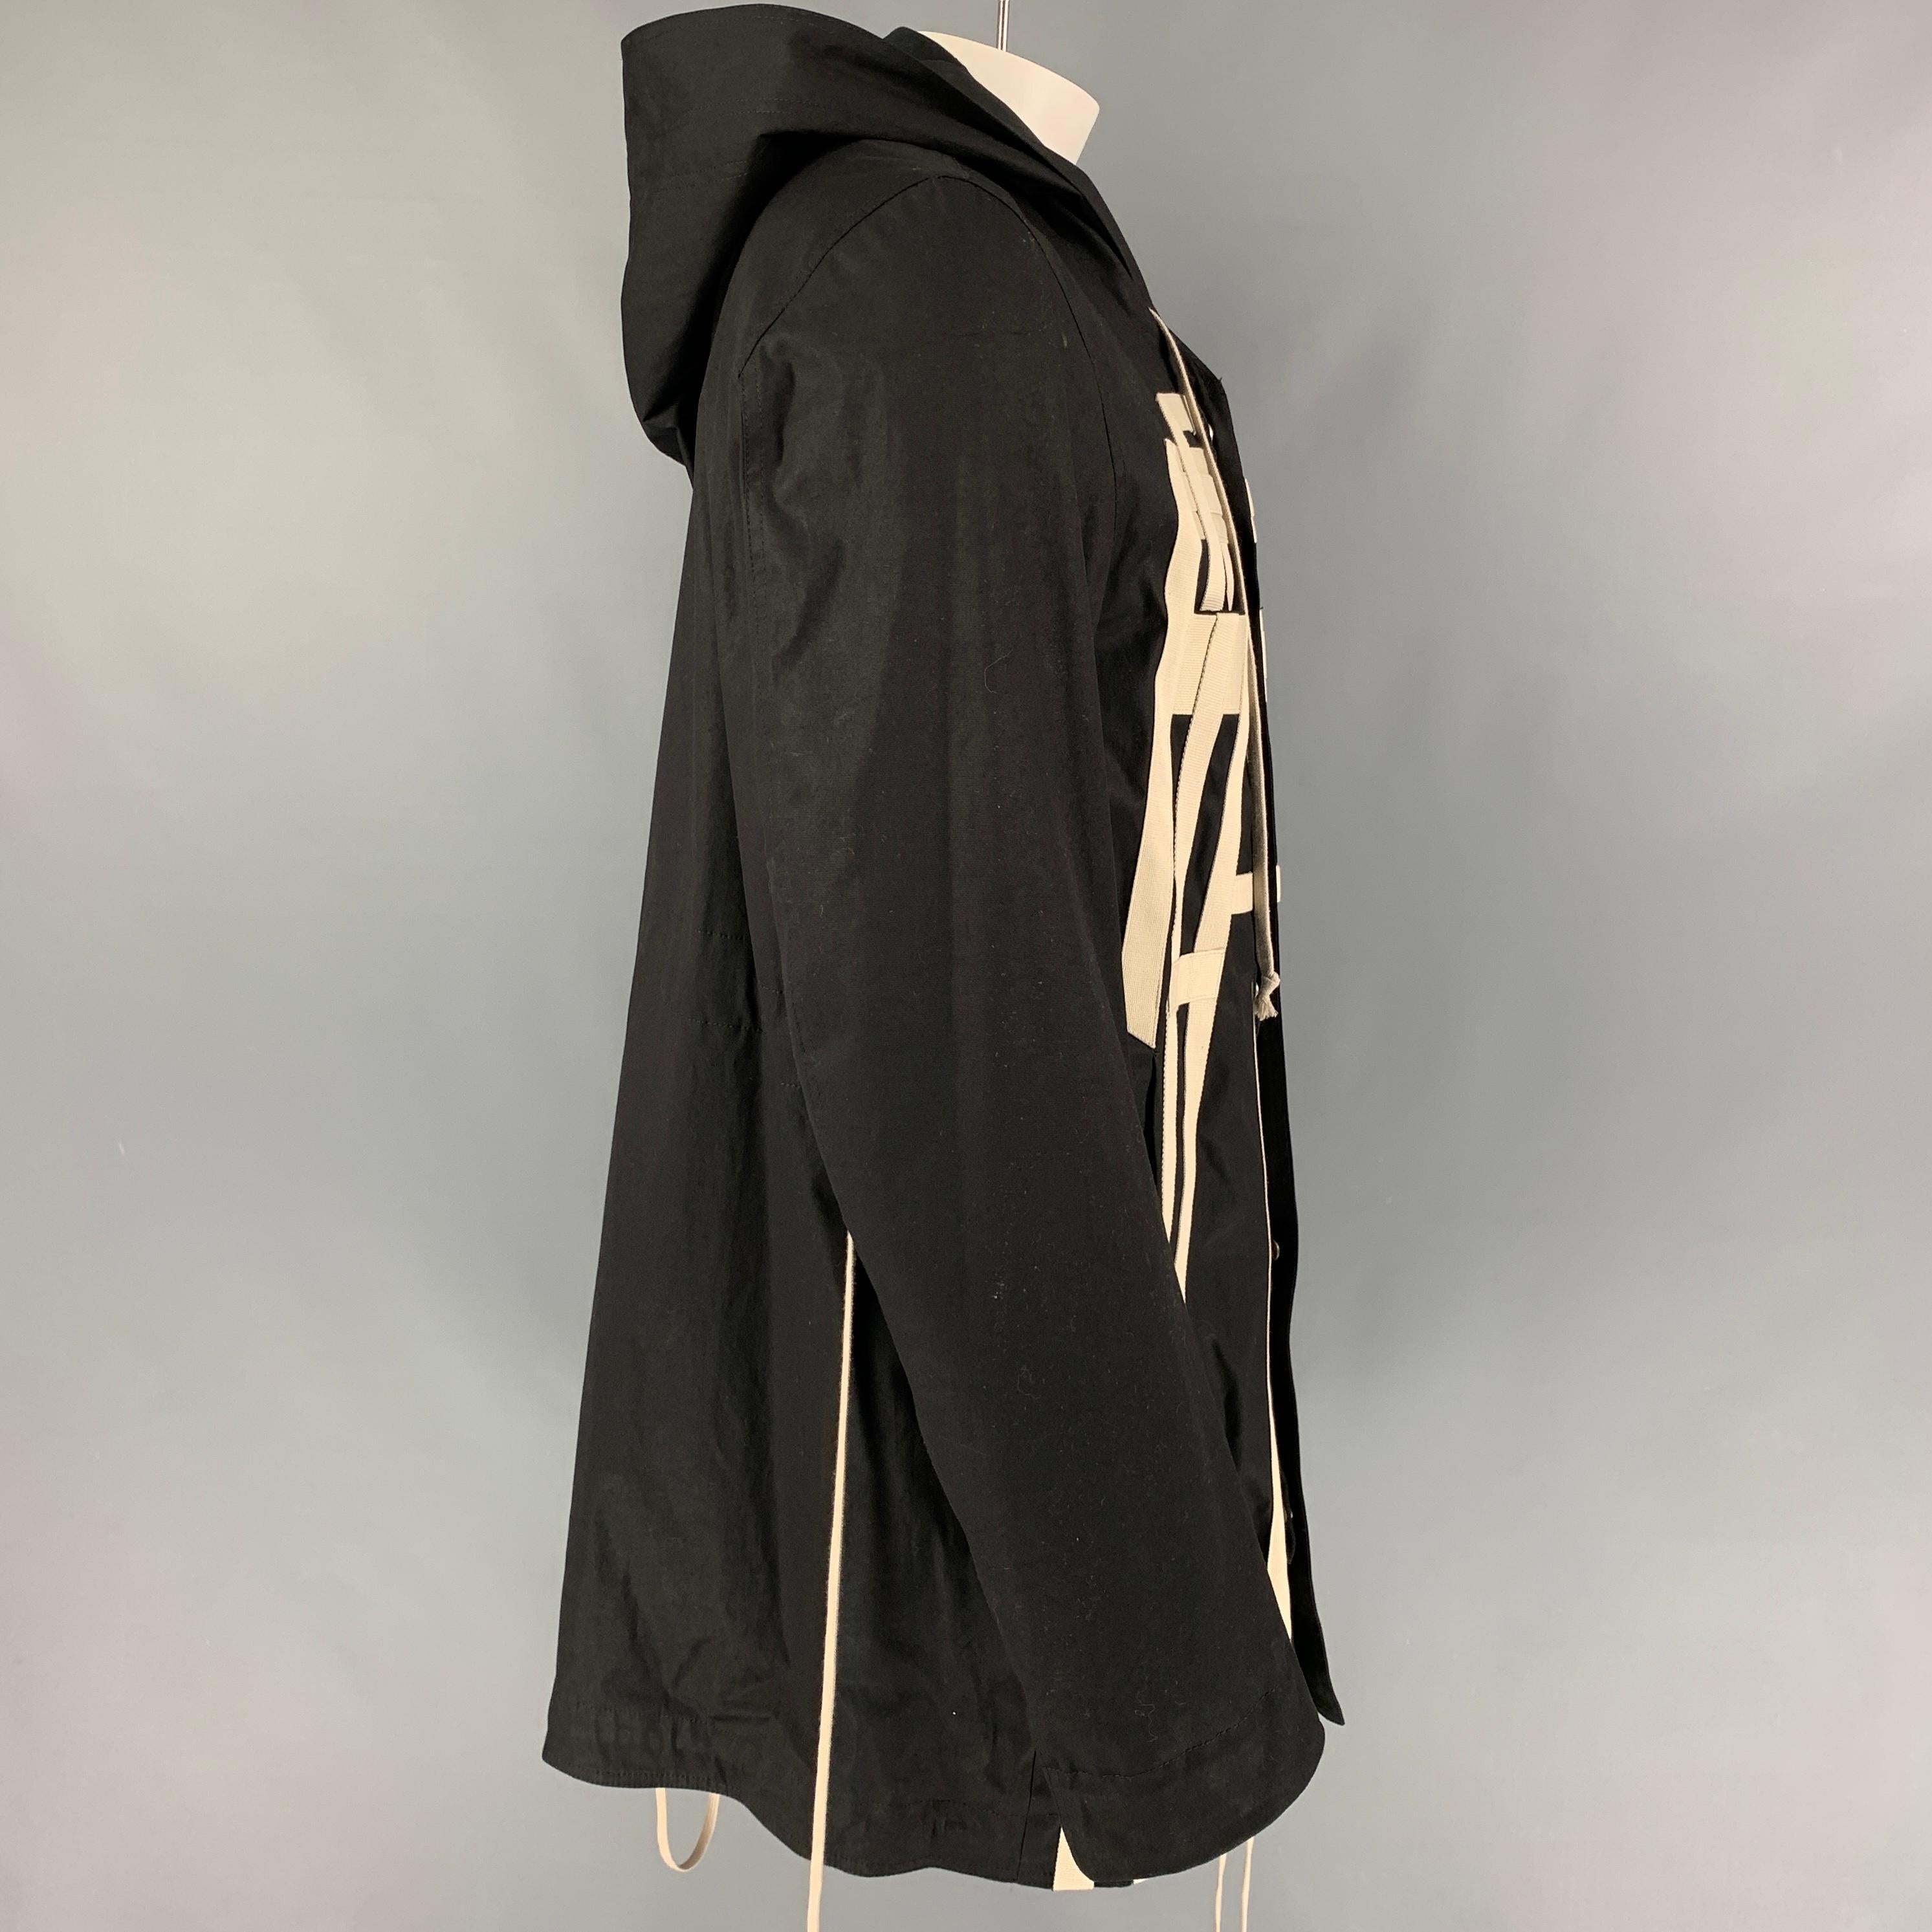 DRKSHDW by RICK OWENS coat comes in a black cotton featuring signature cream canvas strap details, hooded, front pockets, hooded, single back vent, and a zip & snap button closure. Includes tote bag. Made in Italy. 

Excellent Pre-Owned